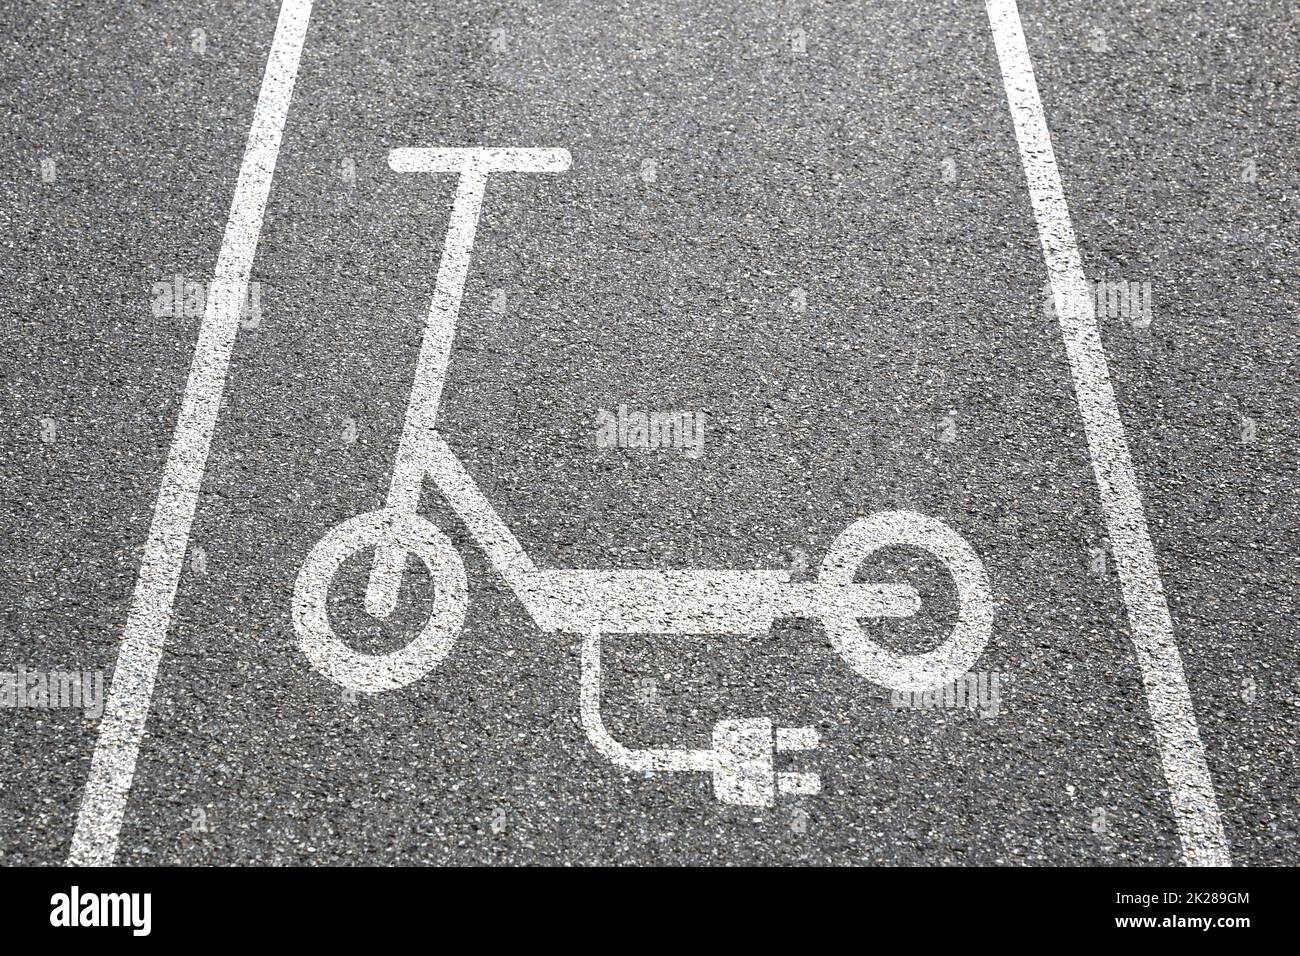 Electric scooter e-scooter lane path way road sign eco friendly mobility Stock Photo